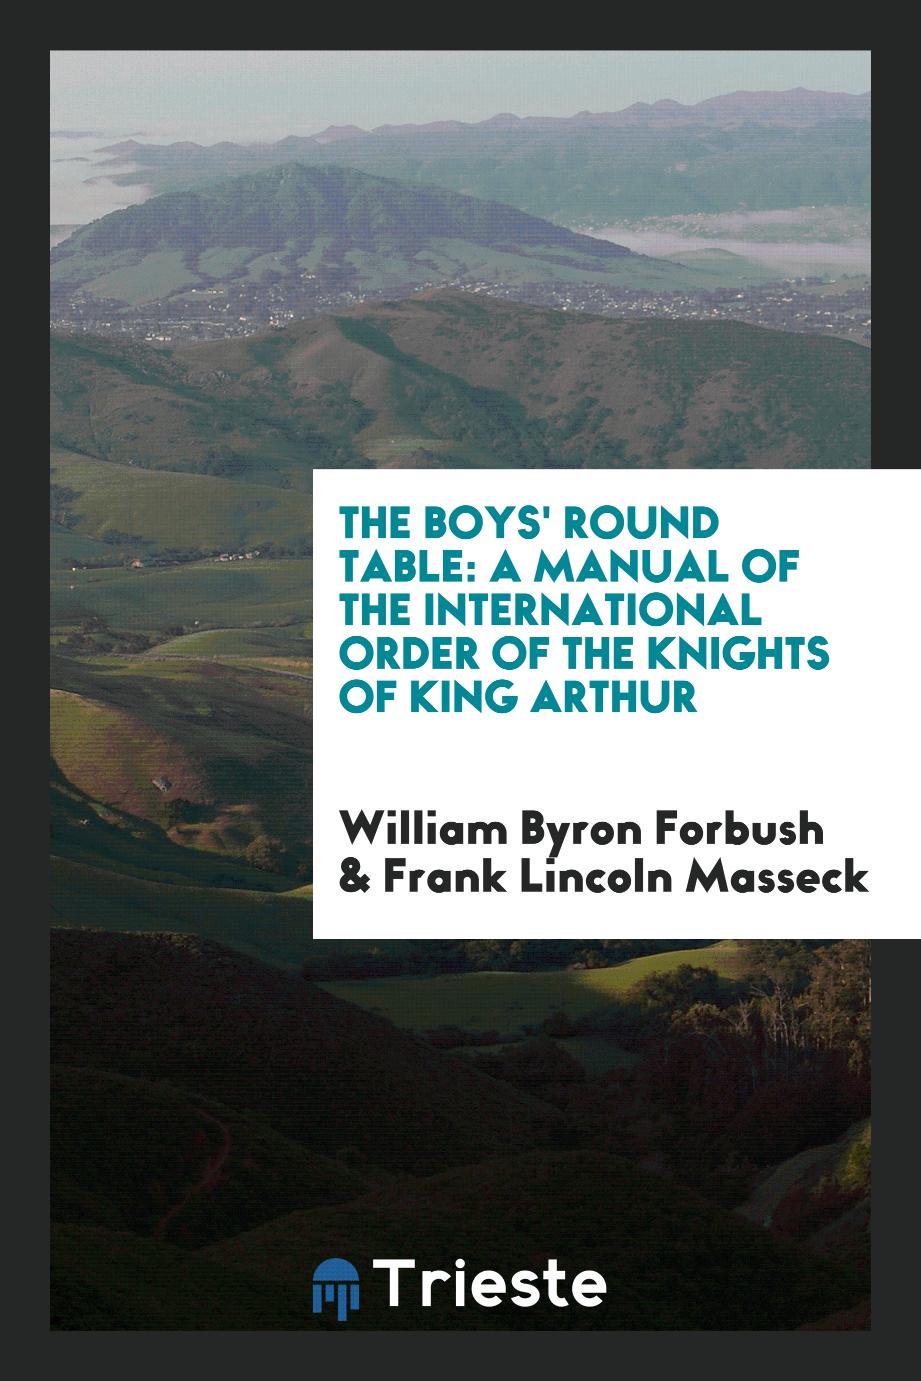 The Boys' Round Table: A Manual of the International Order of the Knights of King Arthur